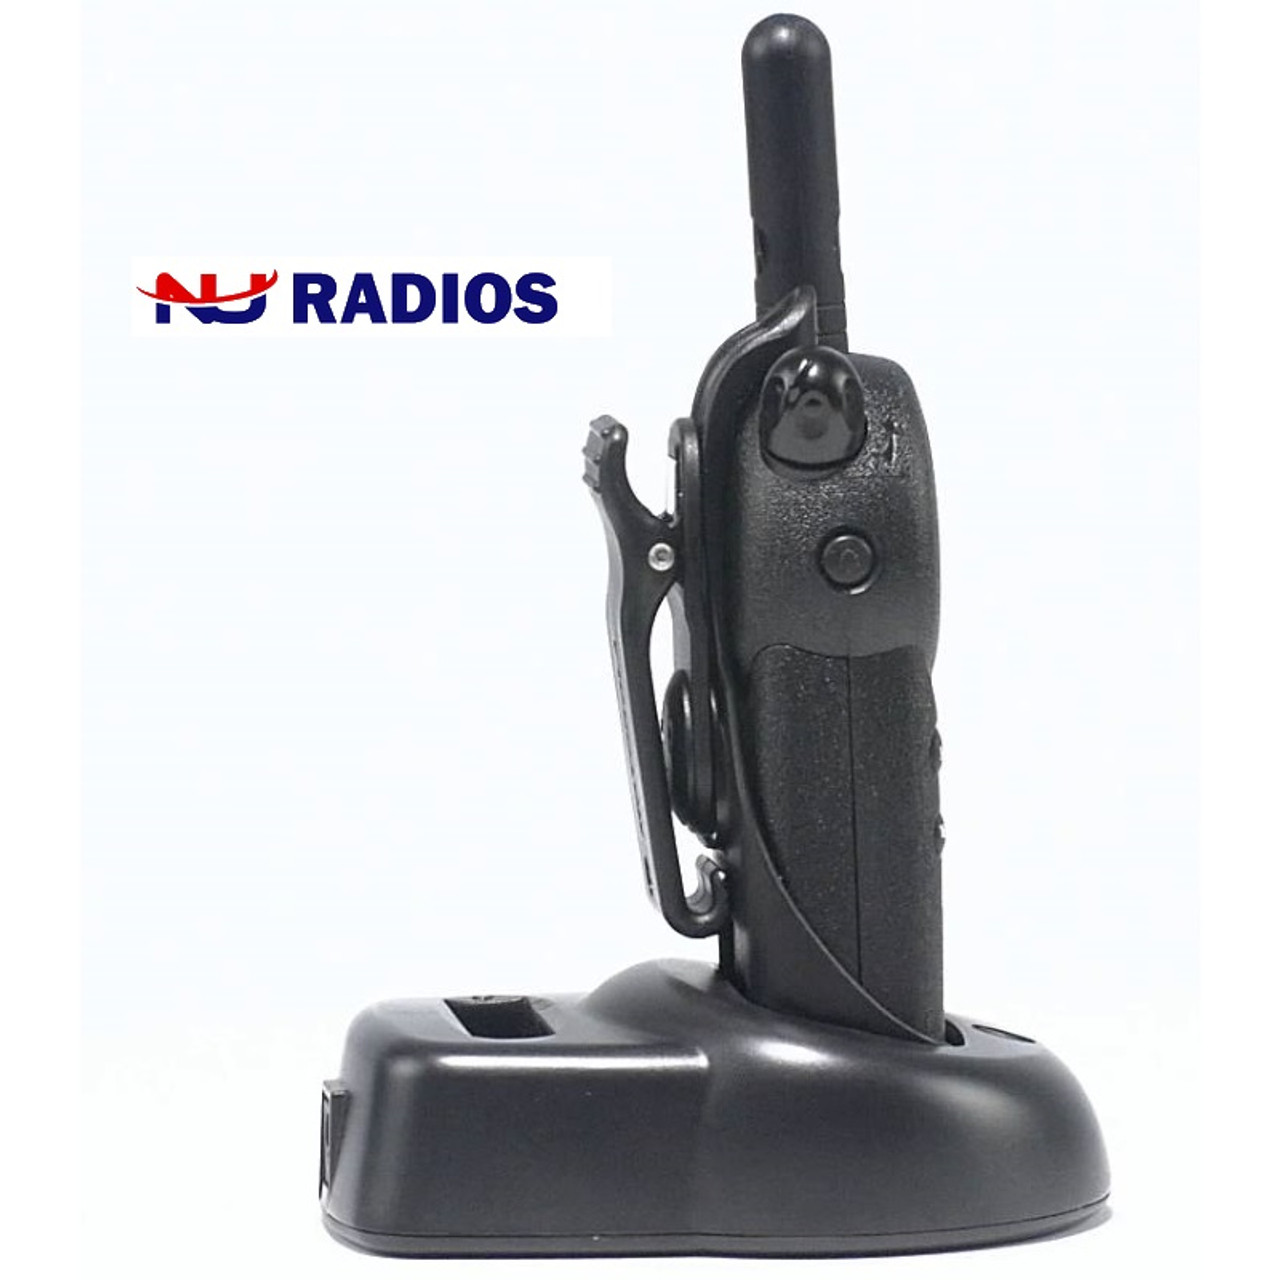 Motorola CLS1410 6-Pack with VibraCall is for business. These UHF Two Way  Radios have channels. Walkie talkies that include holsters, batteries,  chargers and belt clips.